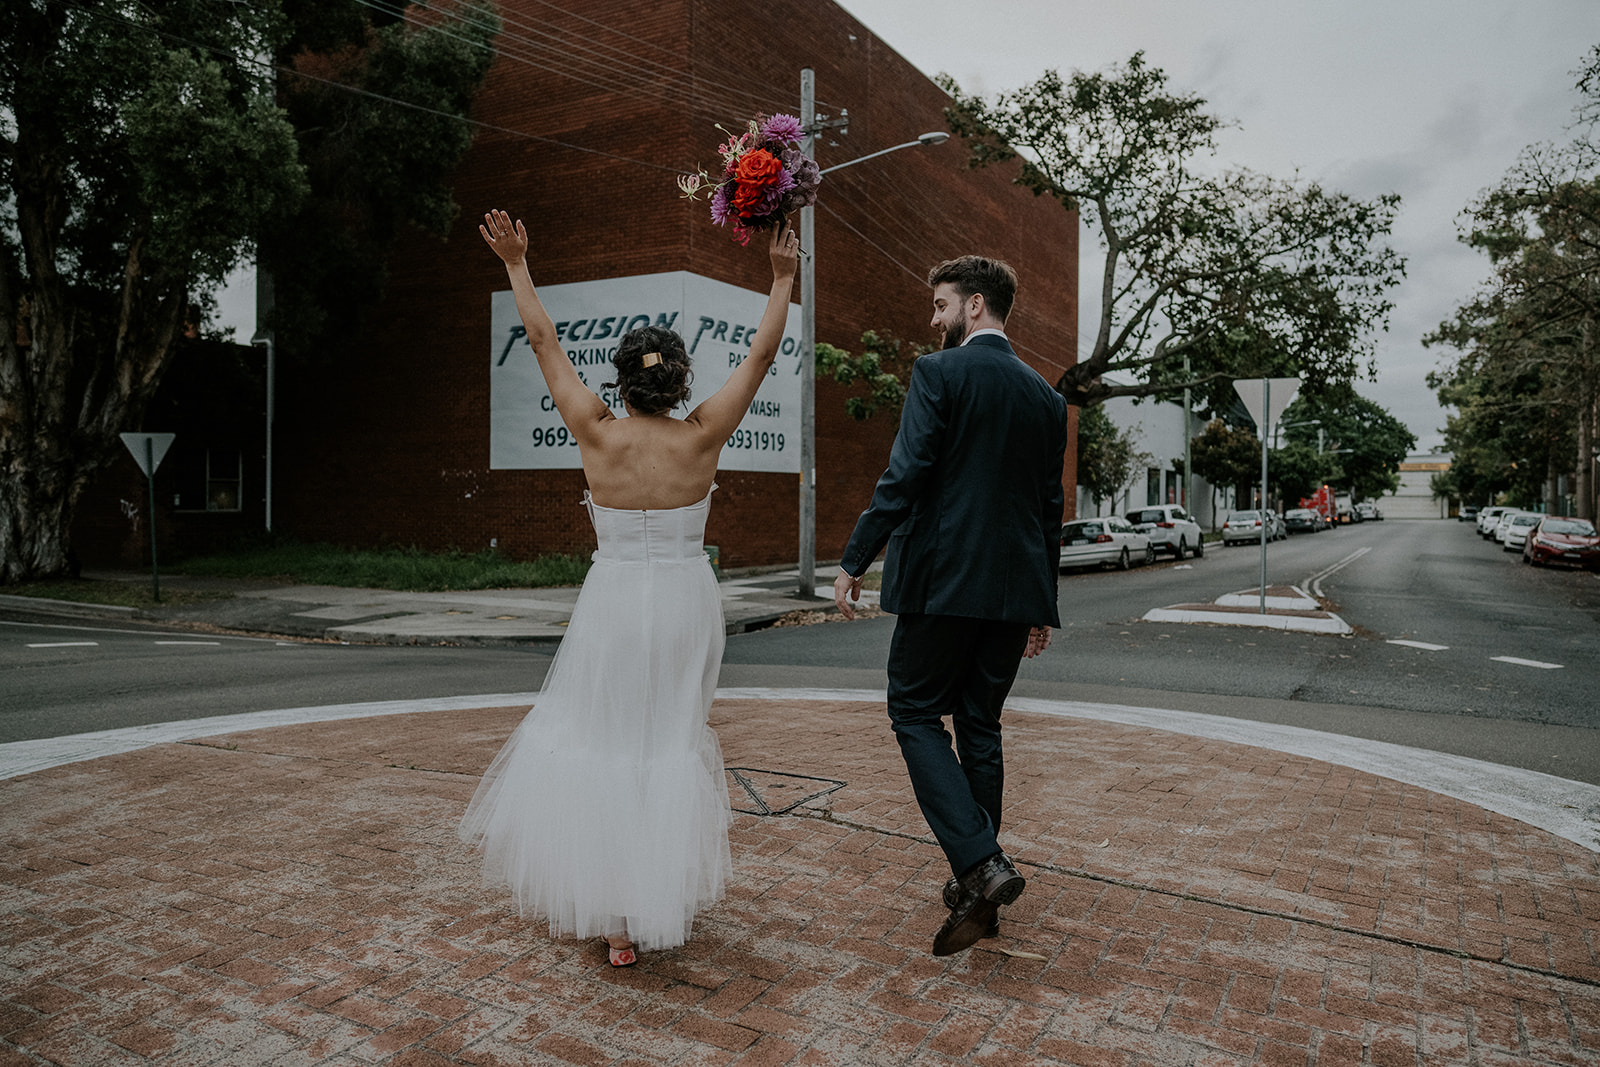 Scott Surplice bride and groom stand on a roundabout